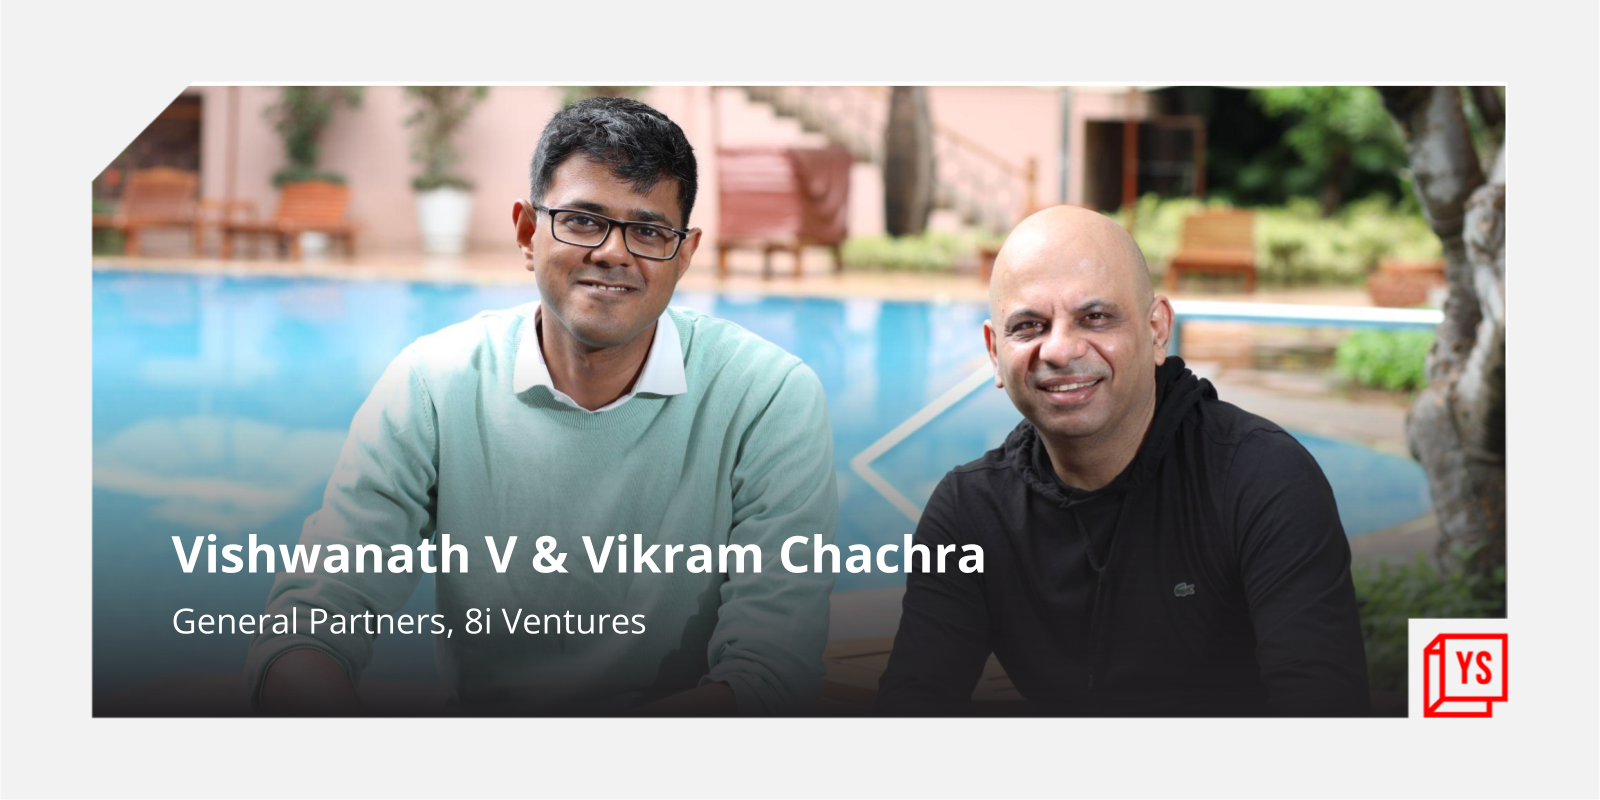 Meet early-stage VC fund 8i Ventures that bets on startups building for India

